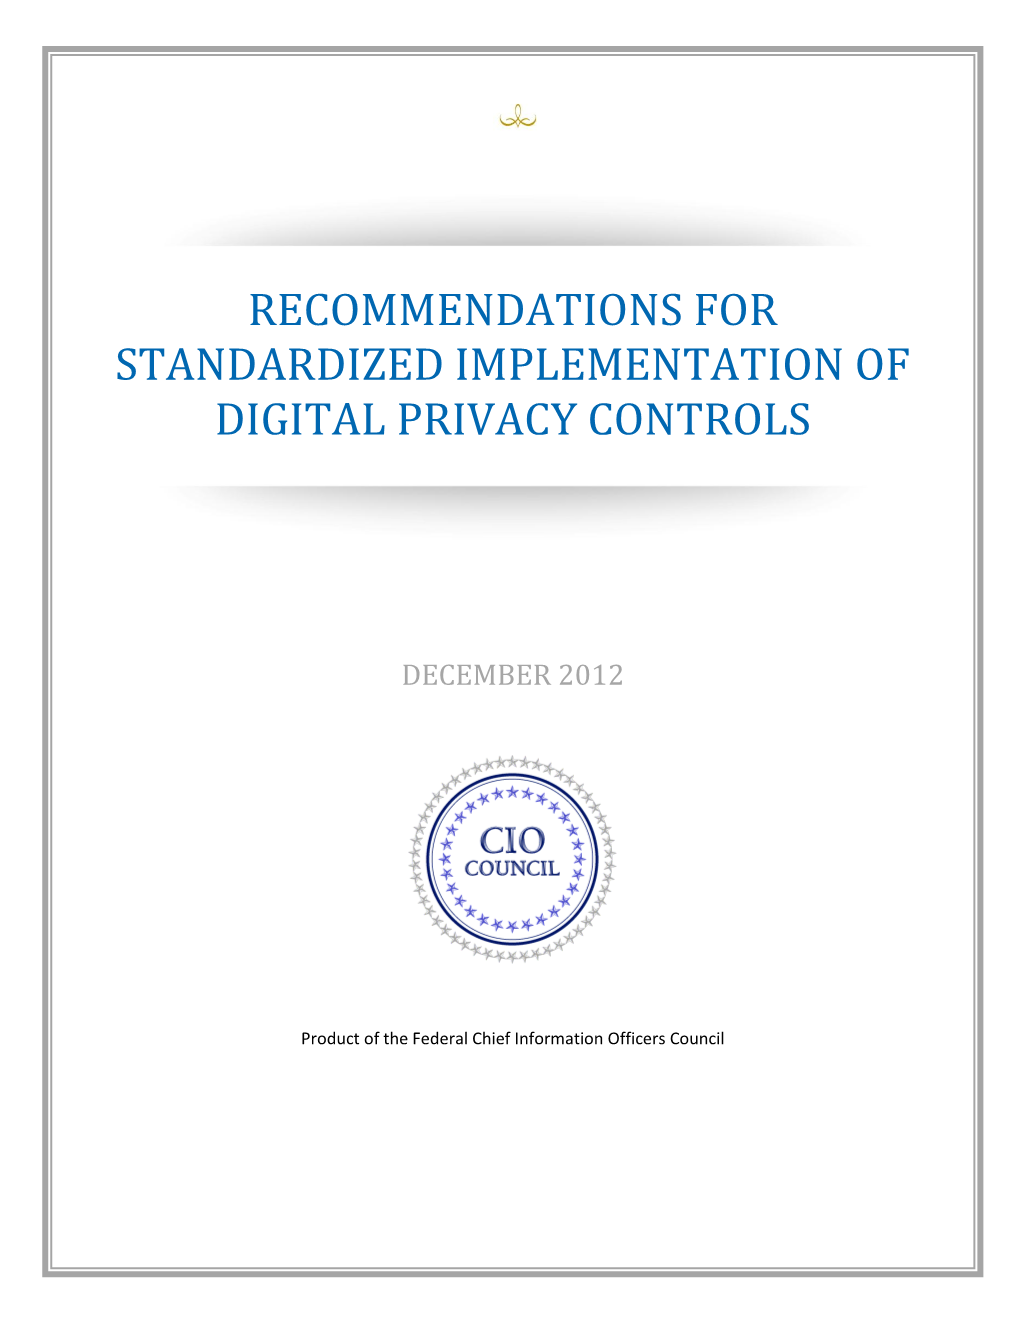 Recommendations for Standardized Implementation of Digital Privacy Controls